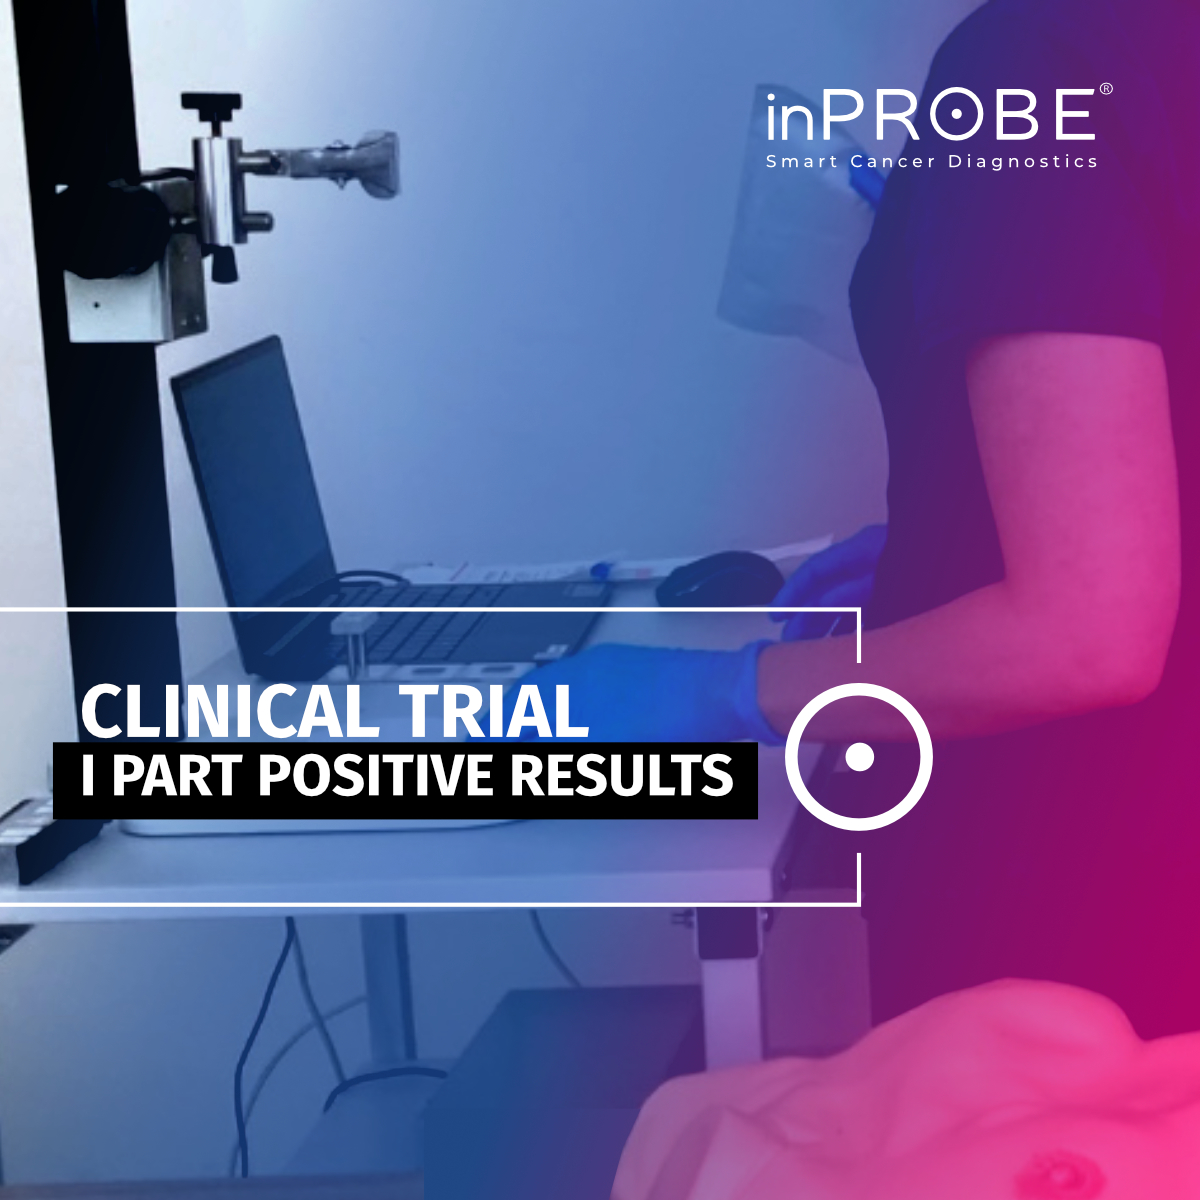 Exciting news! We've received positive results from the first part of the #inPROBE #ClinicalTrial, confirming the safety and achievement of the primary endpoint: initially determining the correlation between measurements using inPROBE® and traditional methods (#IHC/#FISH).